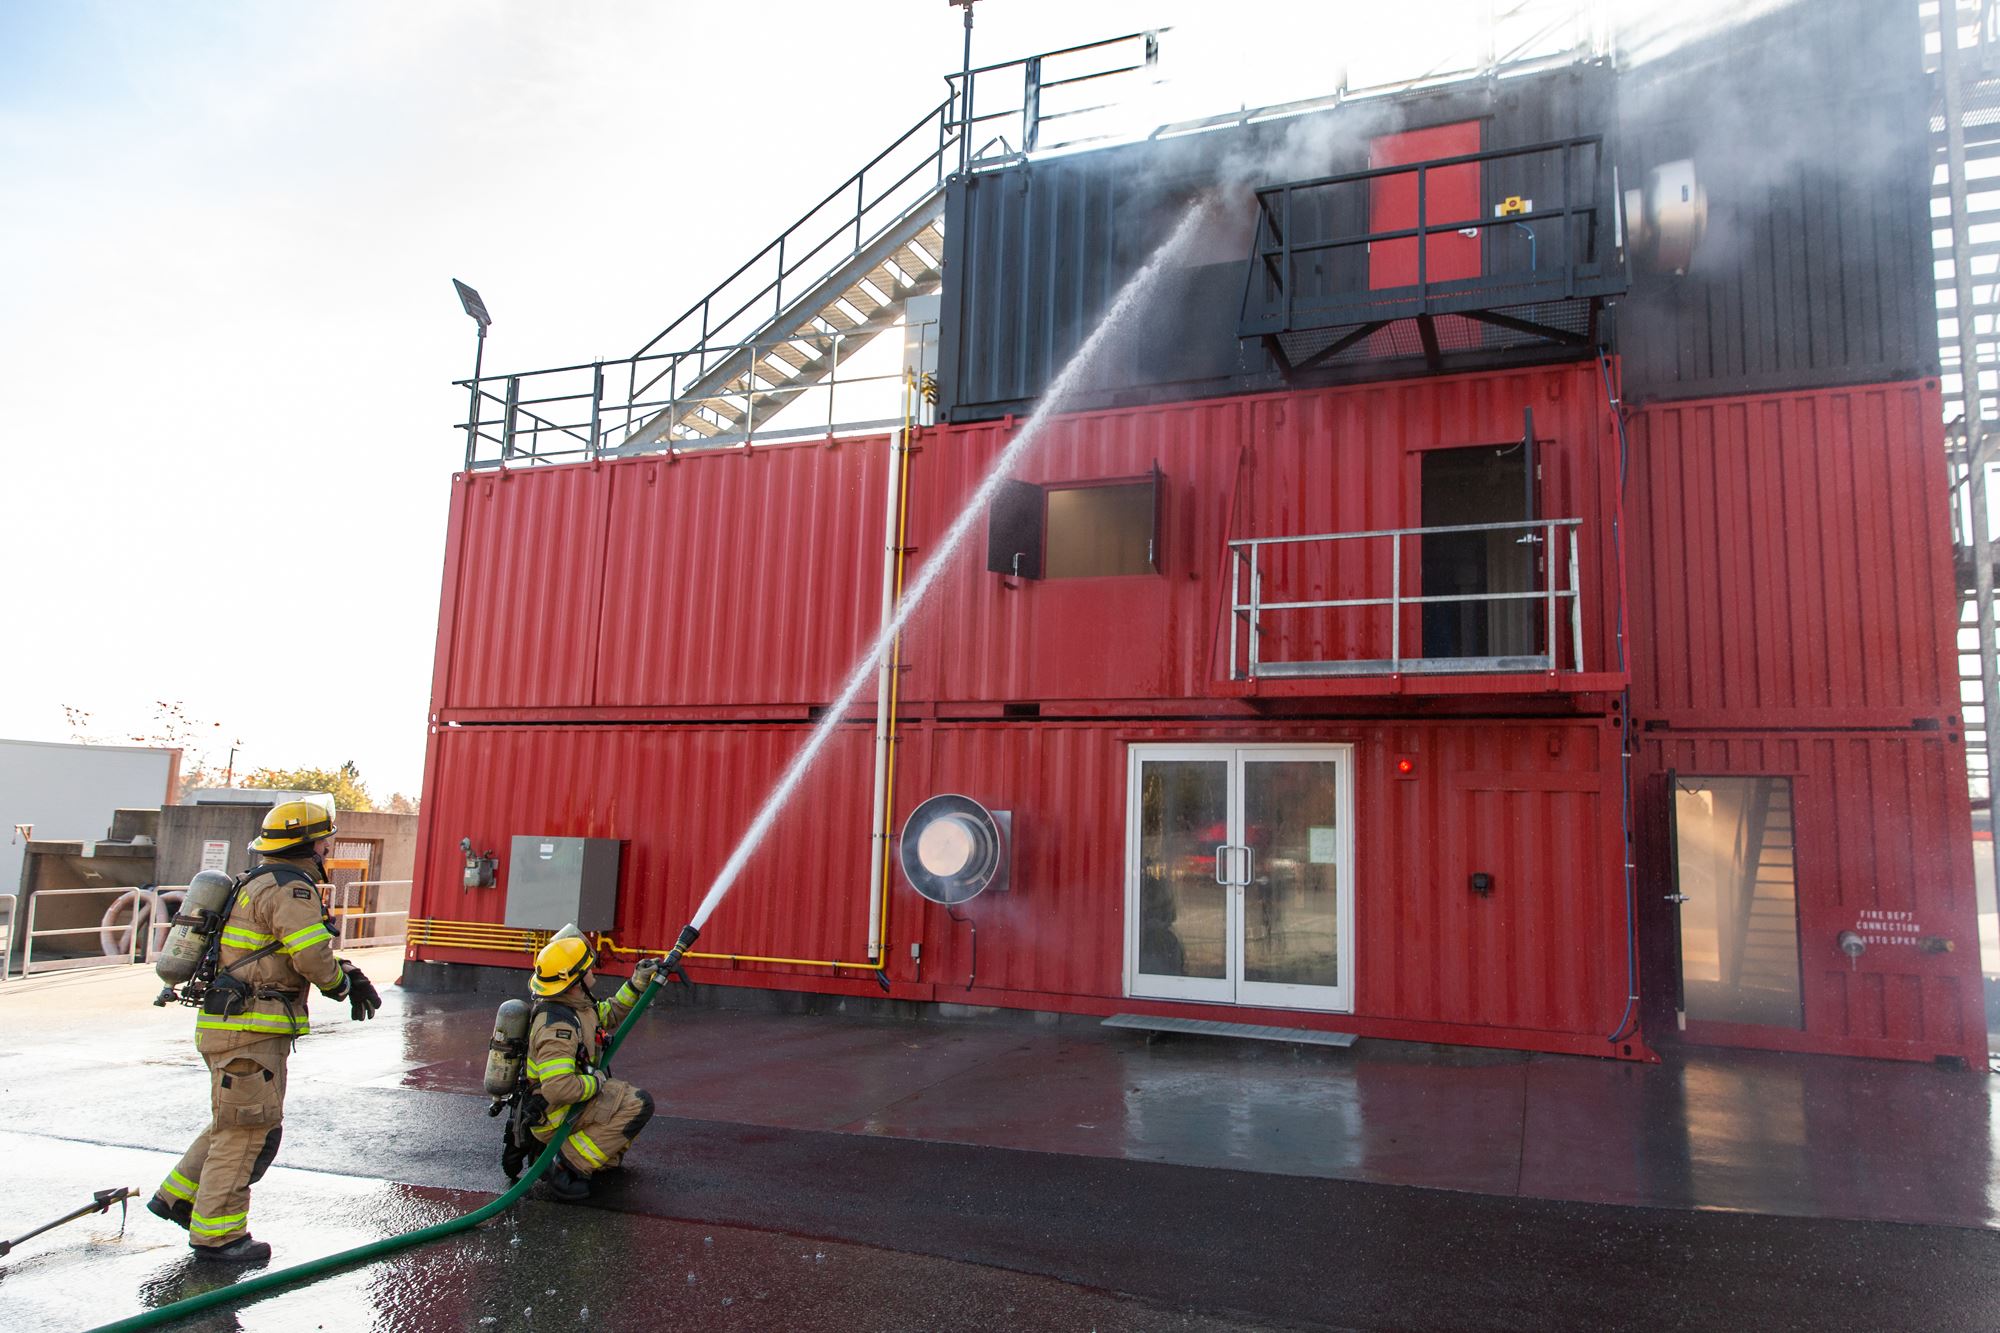 Fire fighters using water hoses to extinguish fire in training exercise